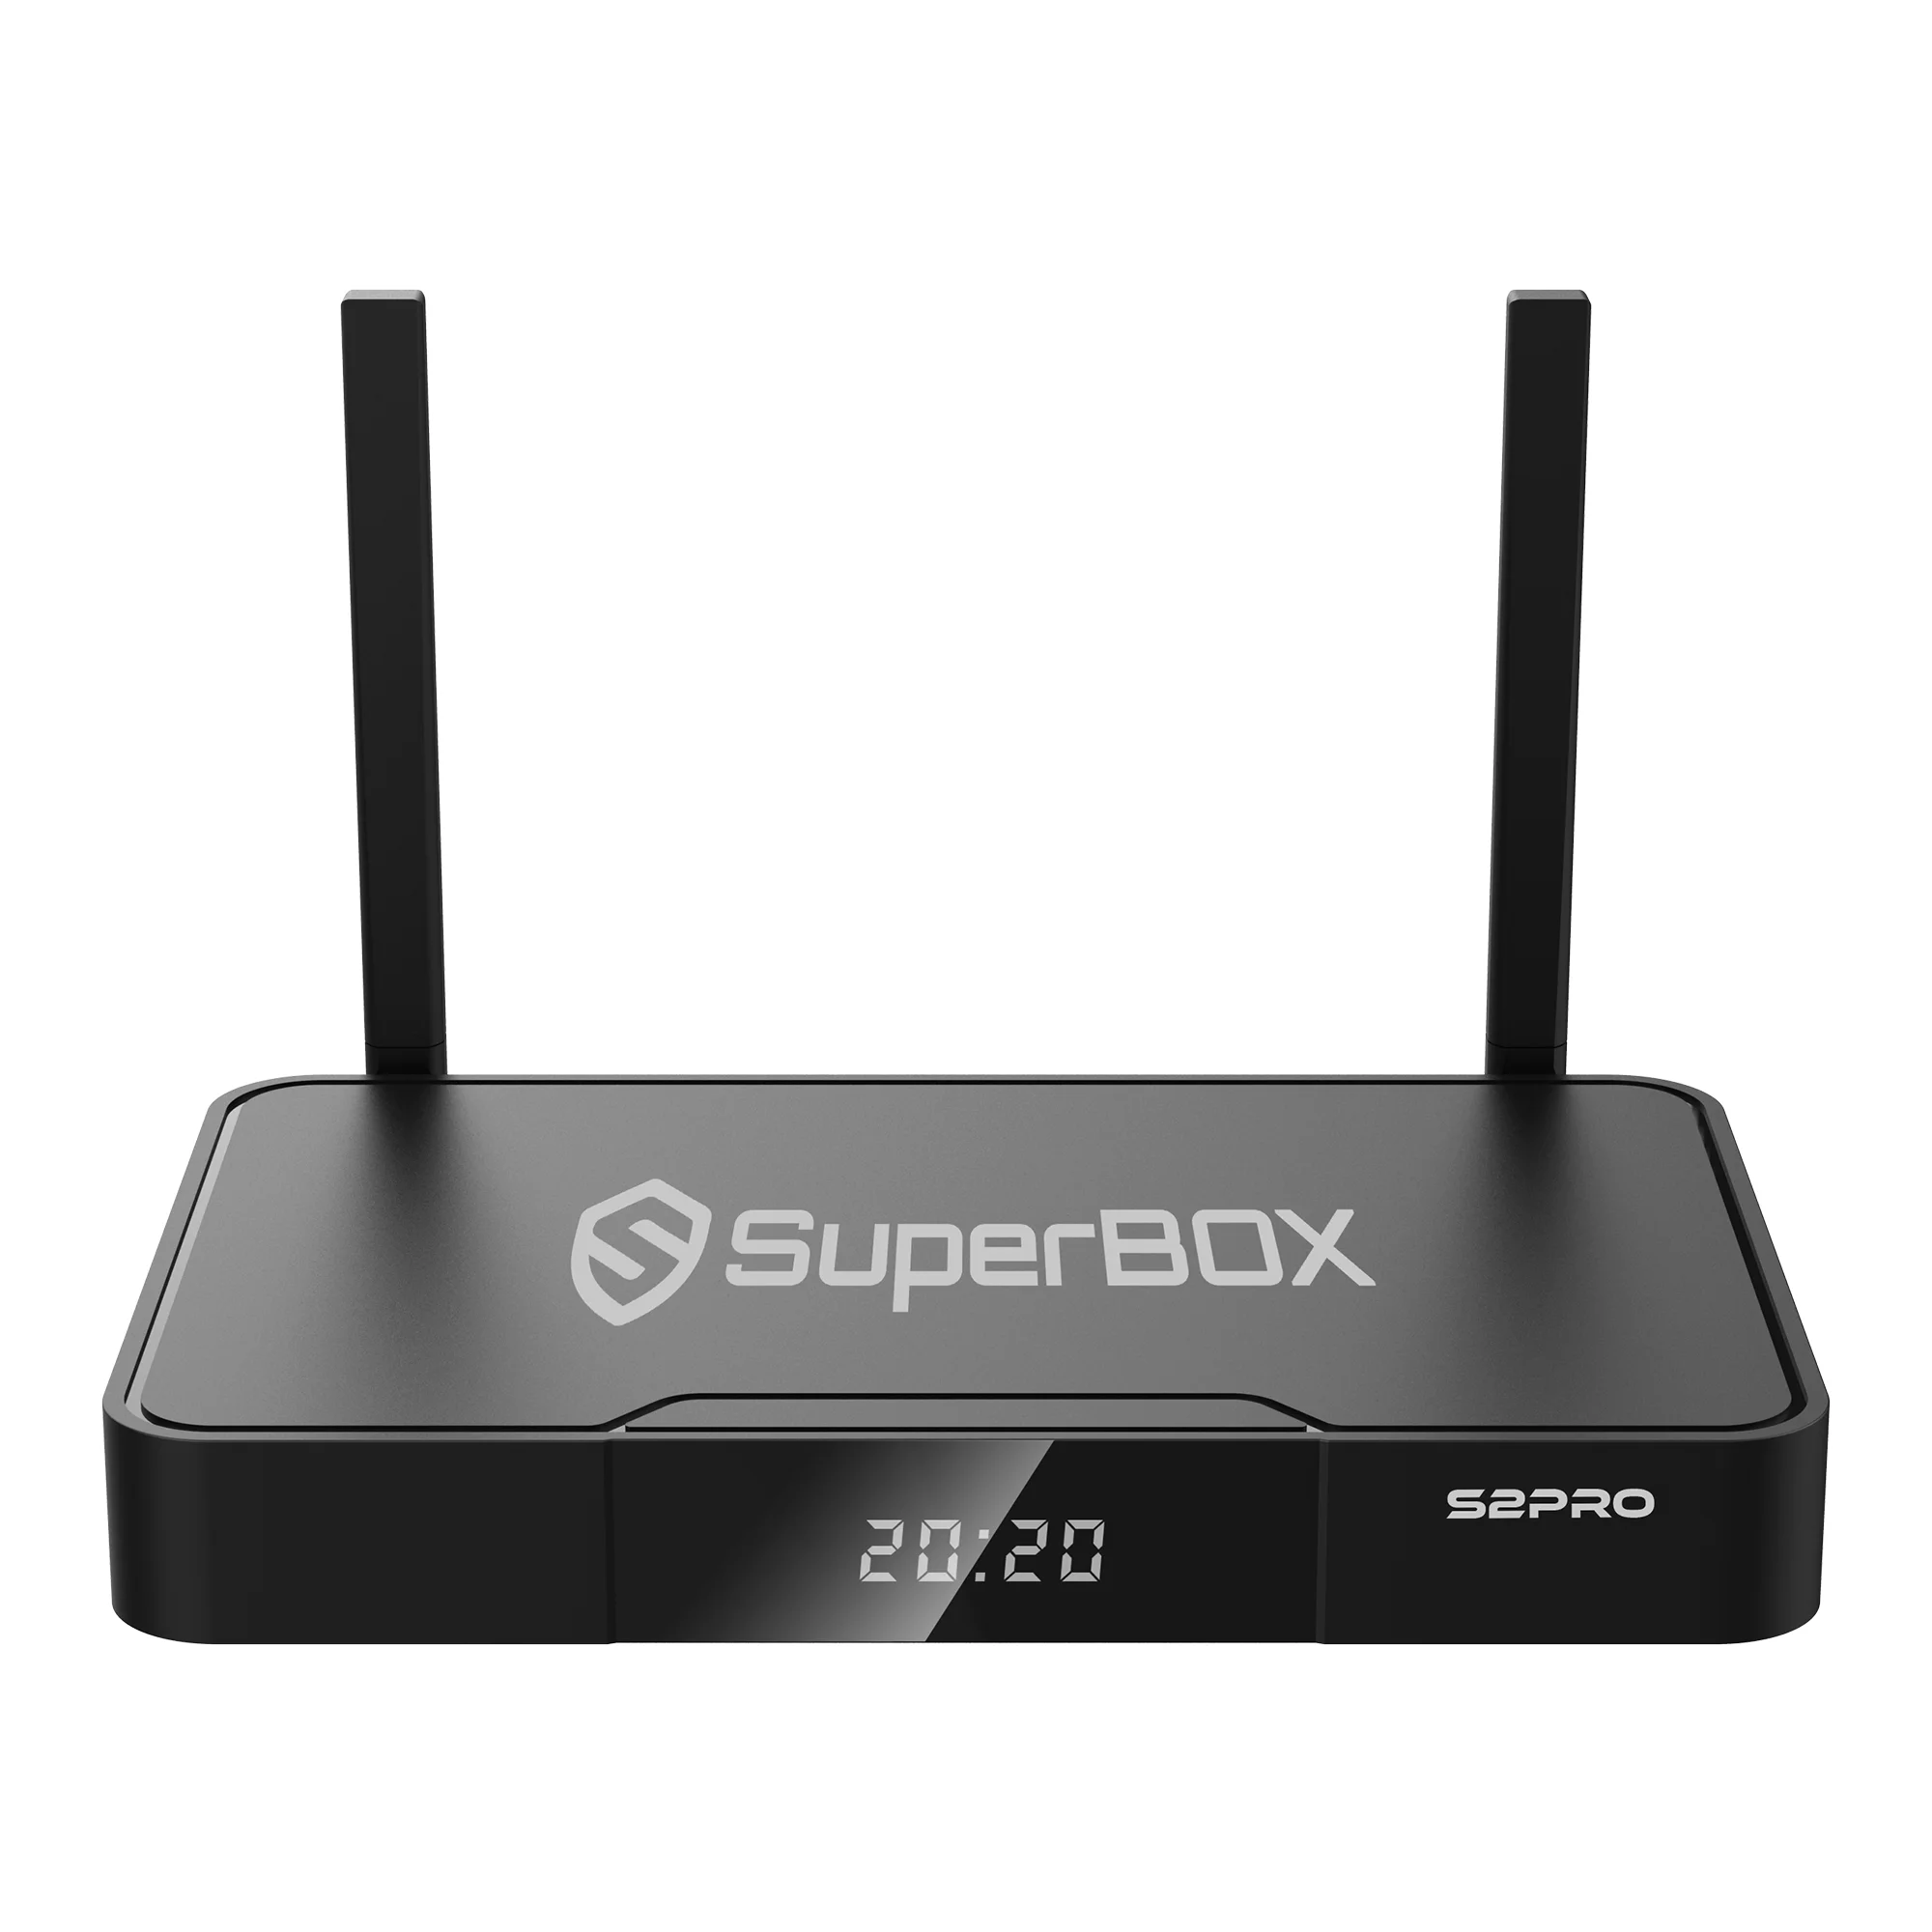 

Chinese supplier customized SuperBox S2 pro newest Edition the set-top box Free shipping from US by USPS